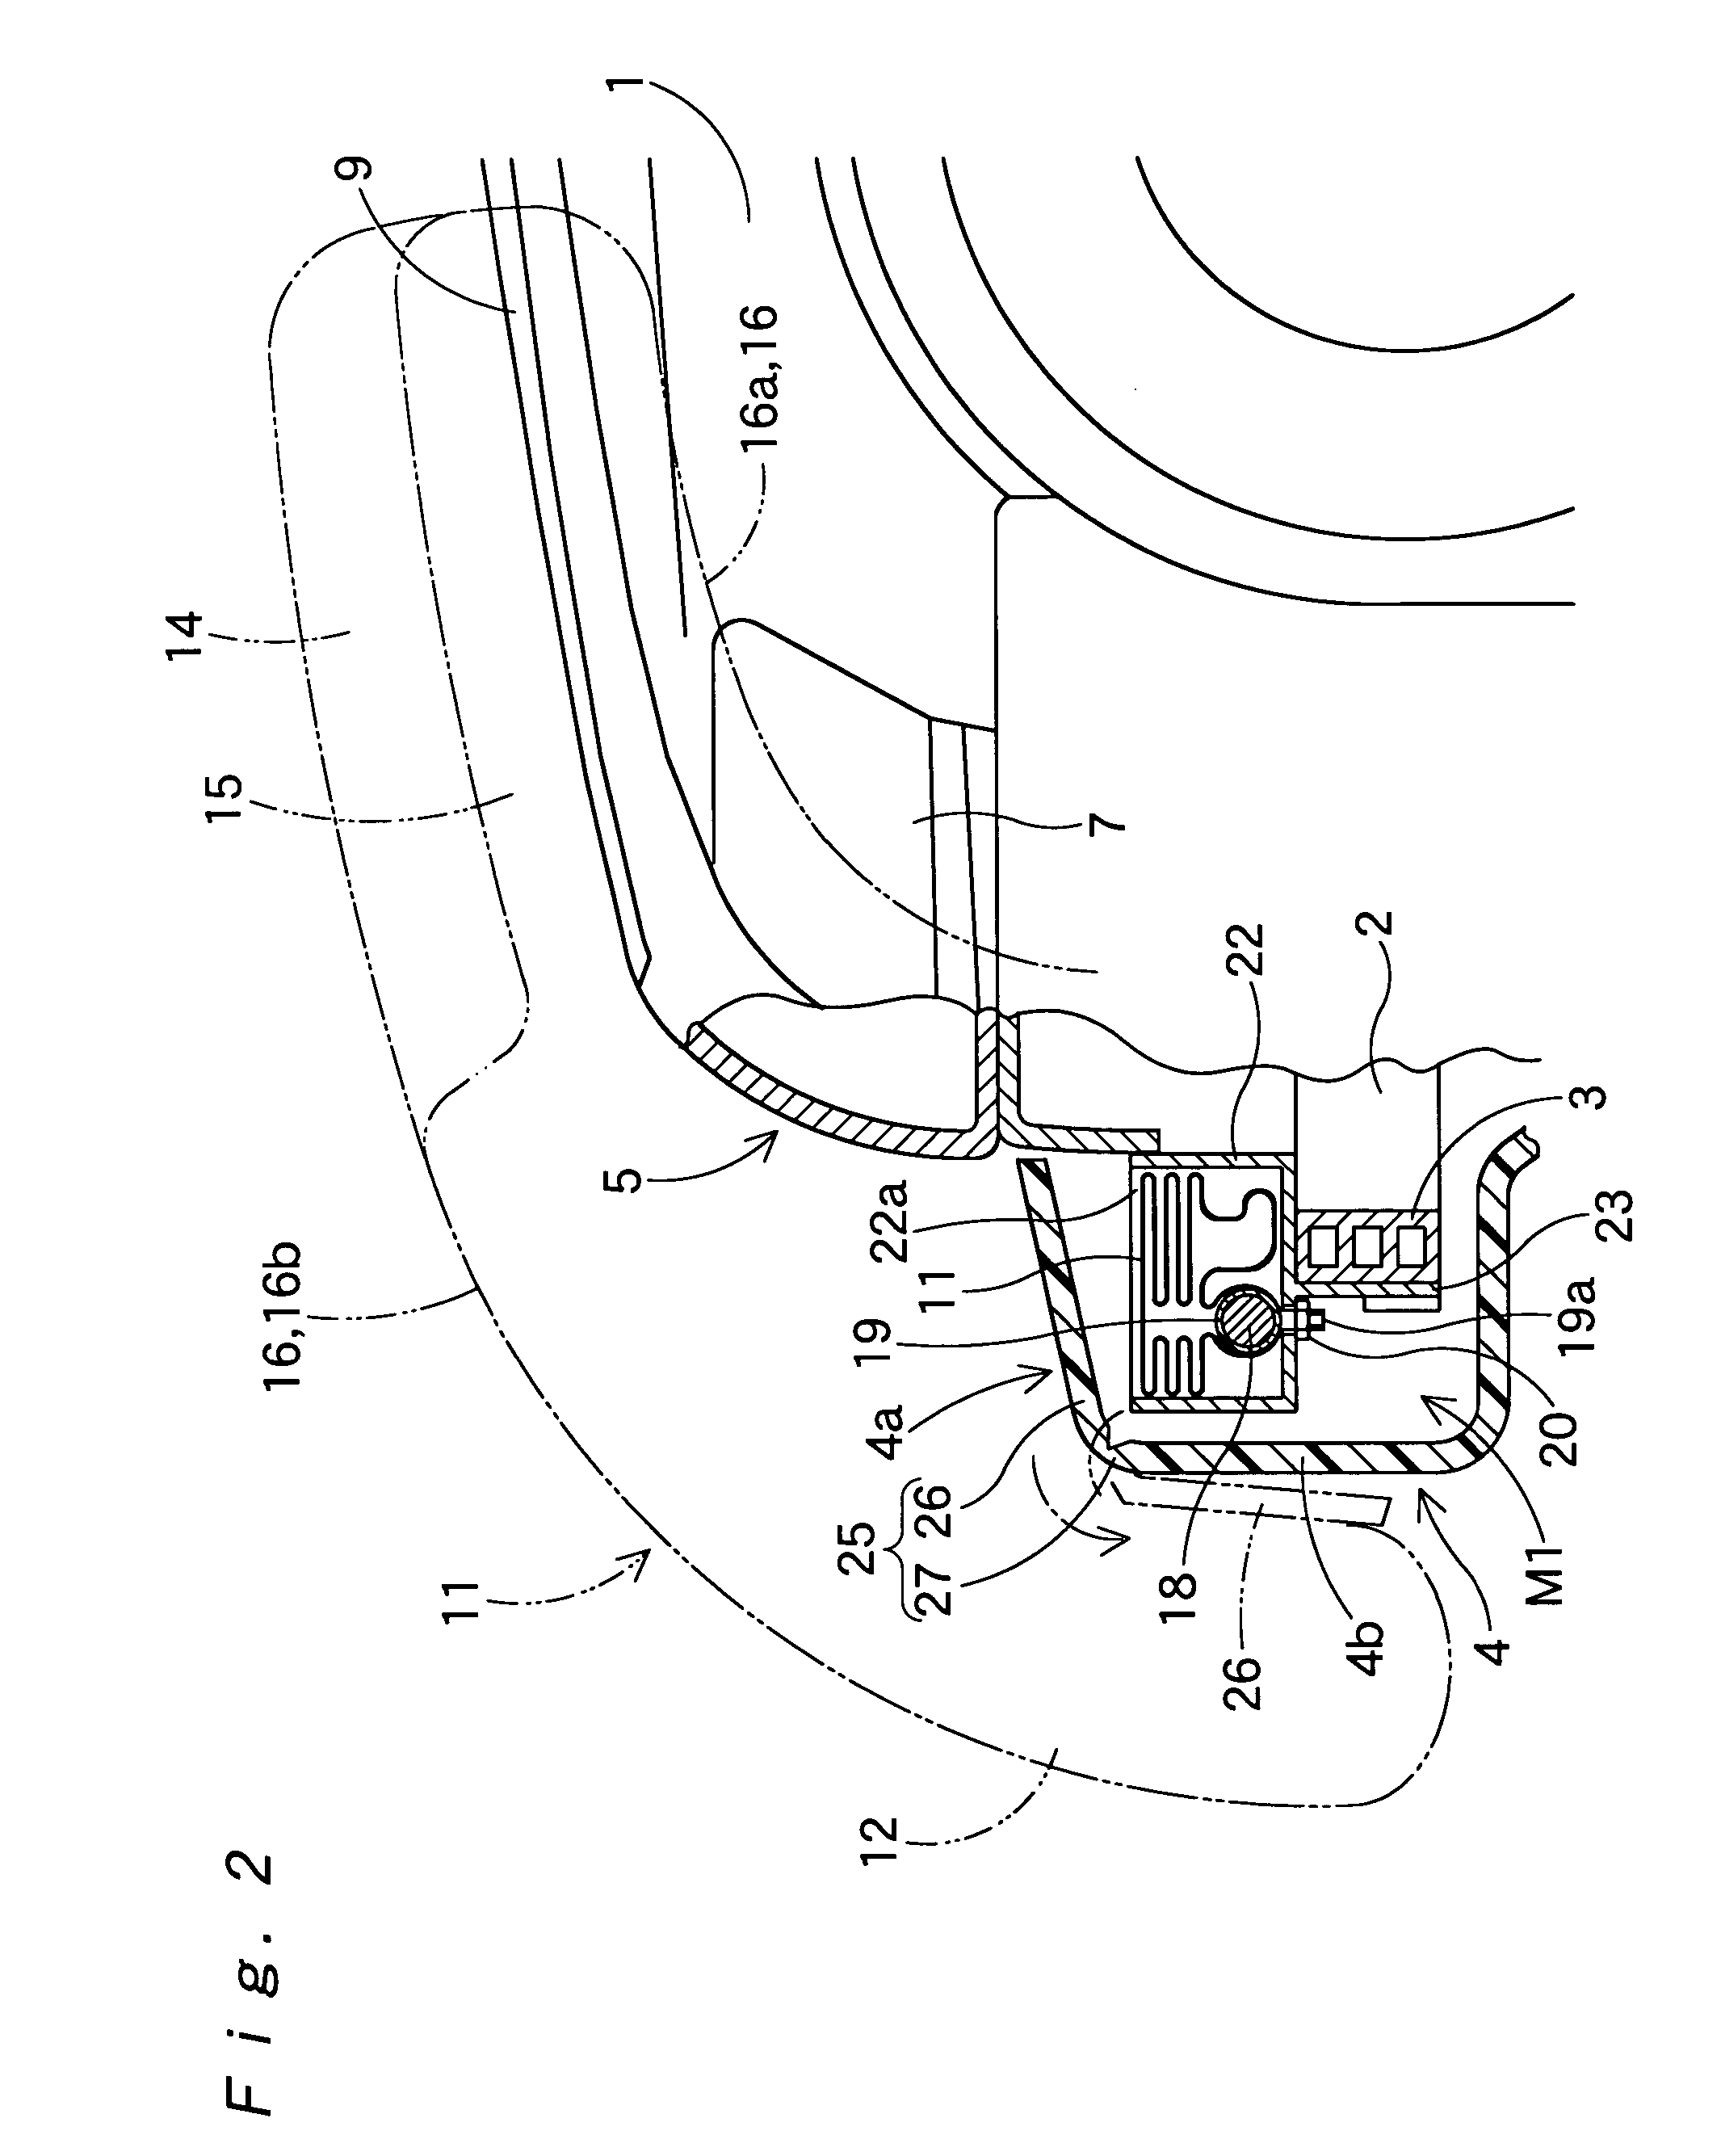 Airbag device for pedestrian protection